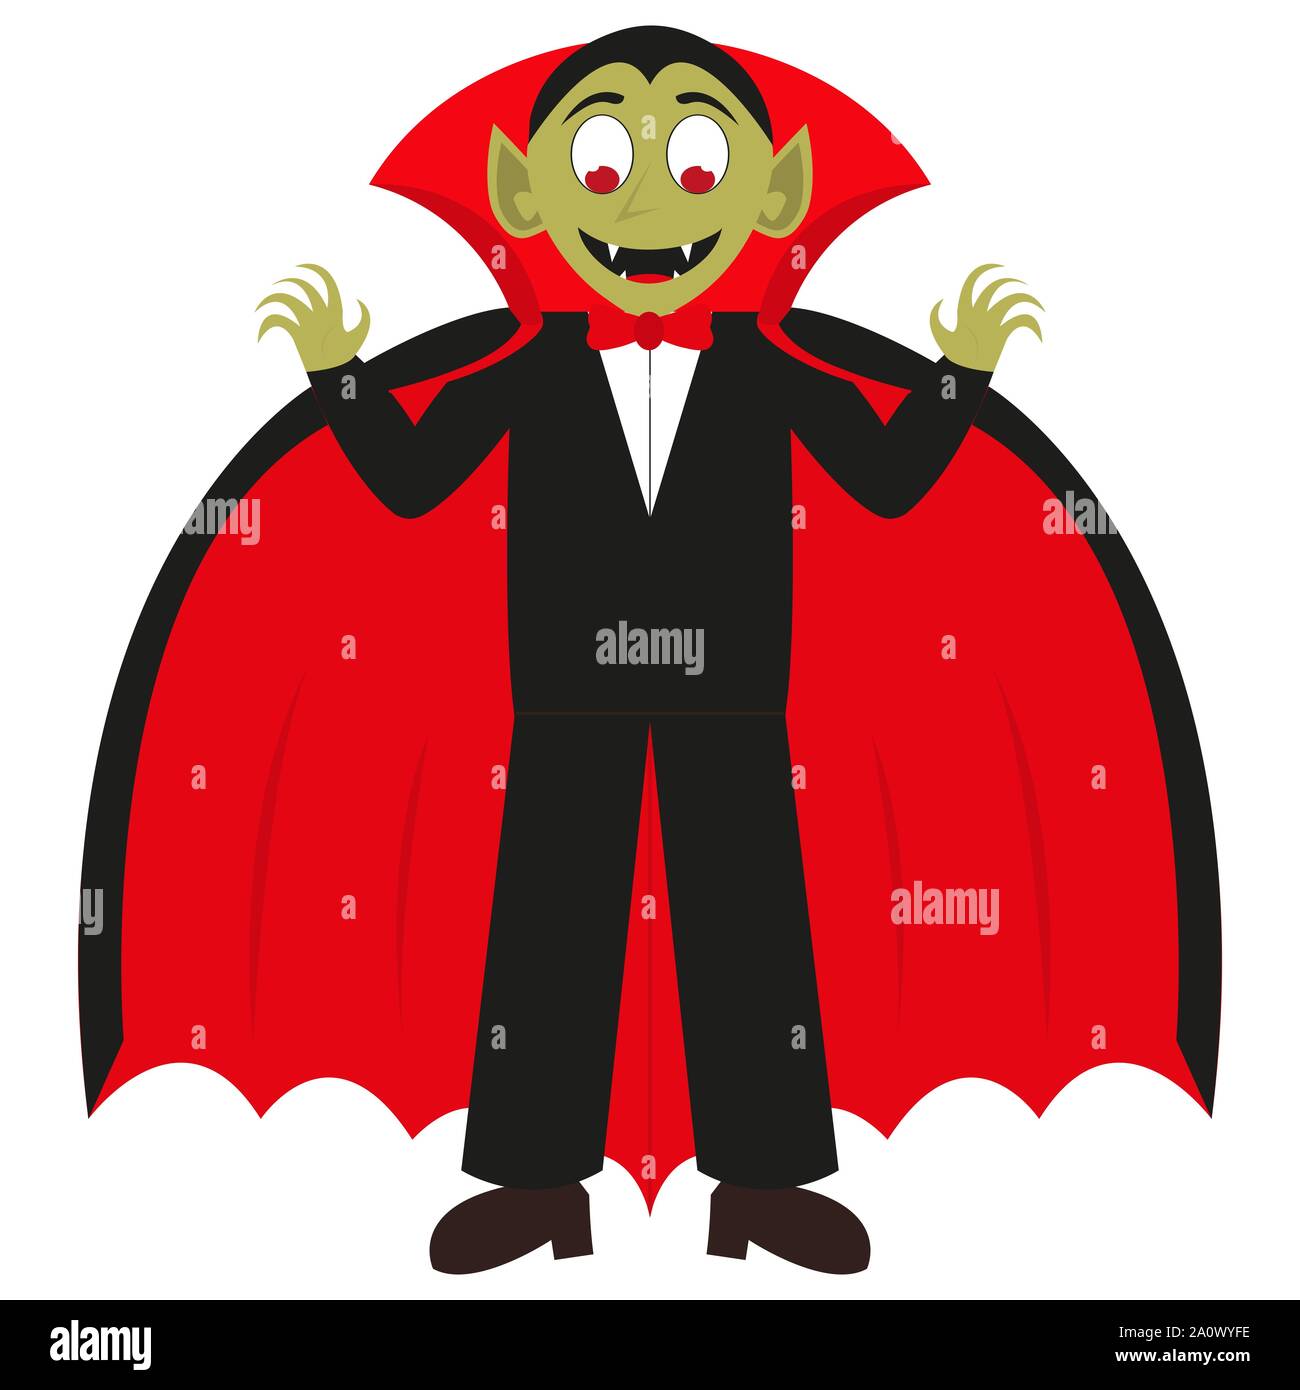 99+ Thousand Cartoon Vampire Royalty-Free Images, Stock Photos & Pictures